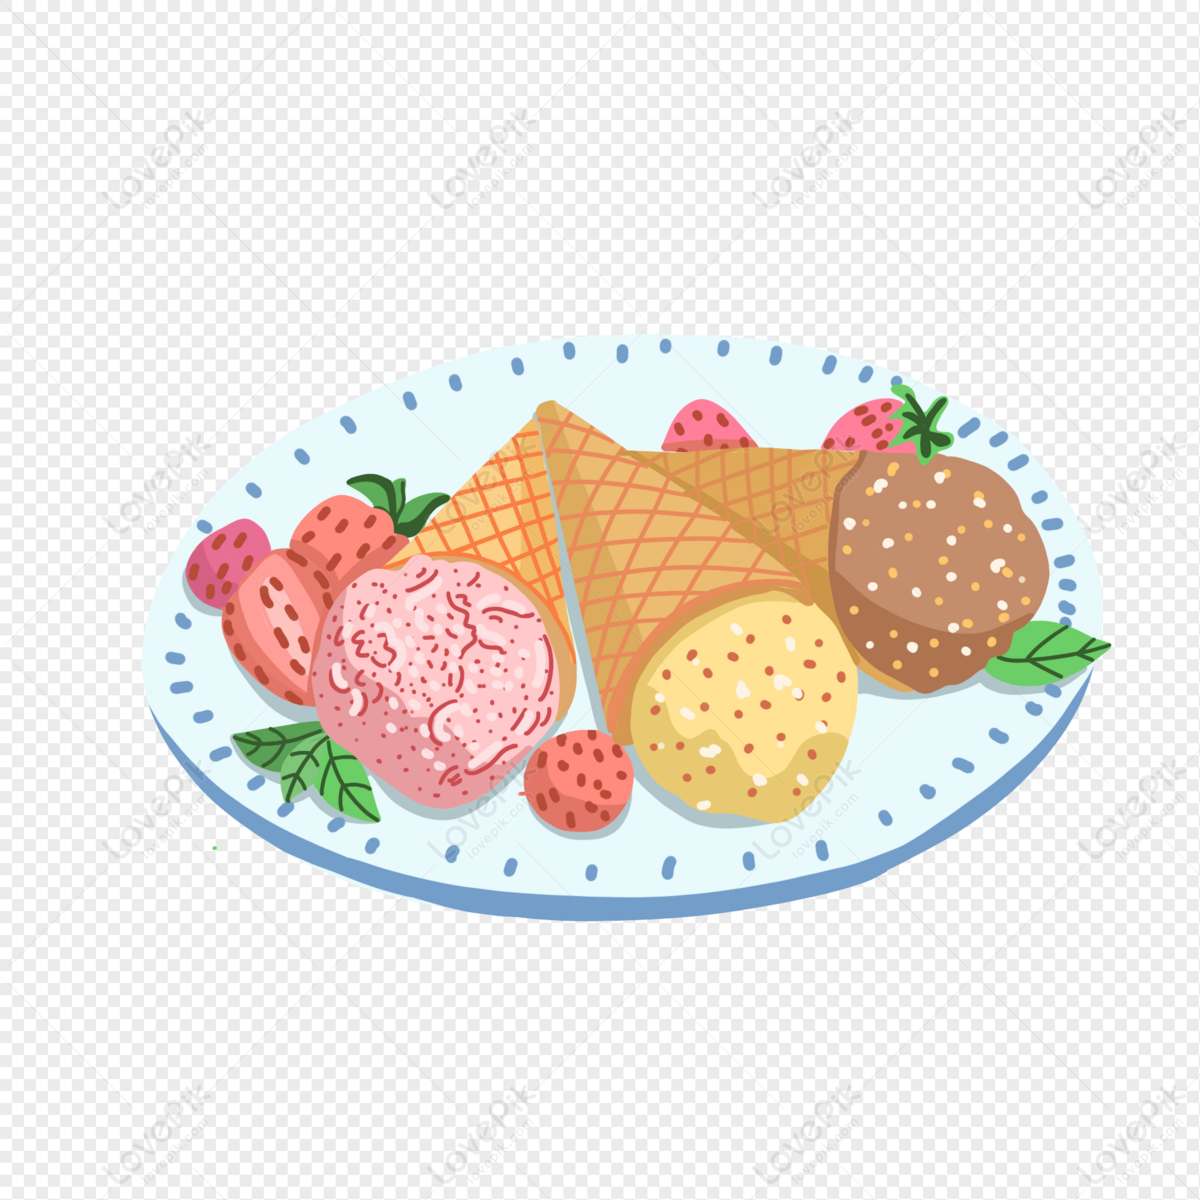 Cartoon Ice Cream Ball PNG Transparent Background And Clipart Image For  Free Download - Lovepik | 401129230